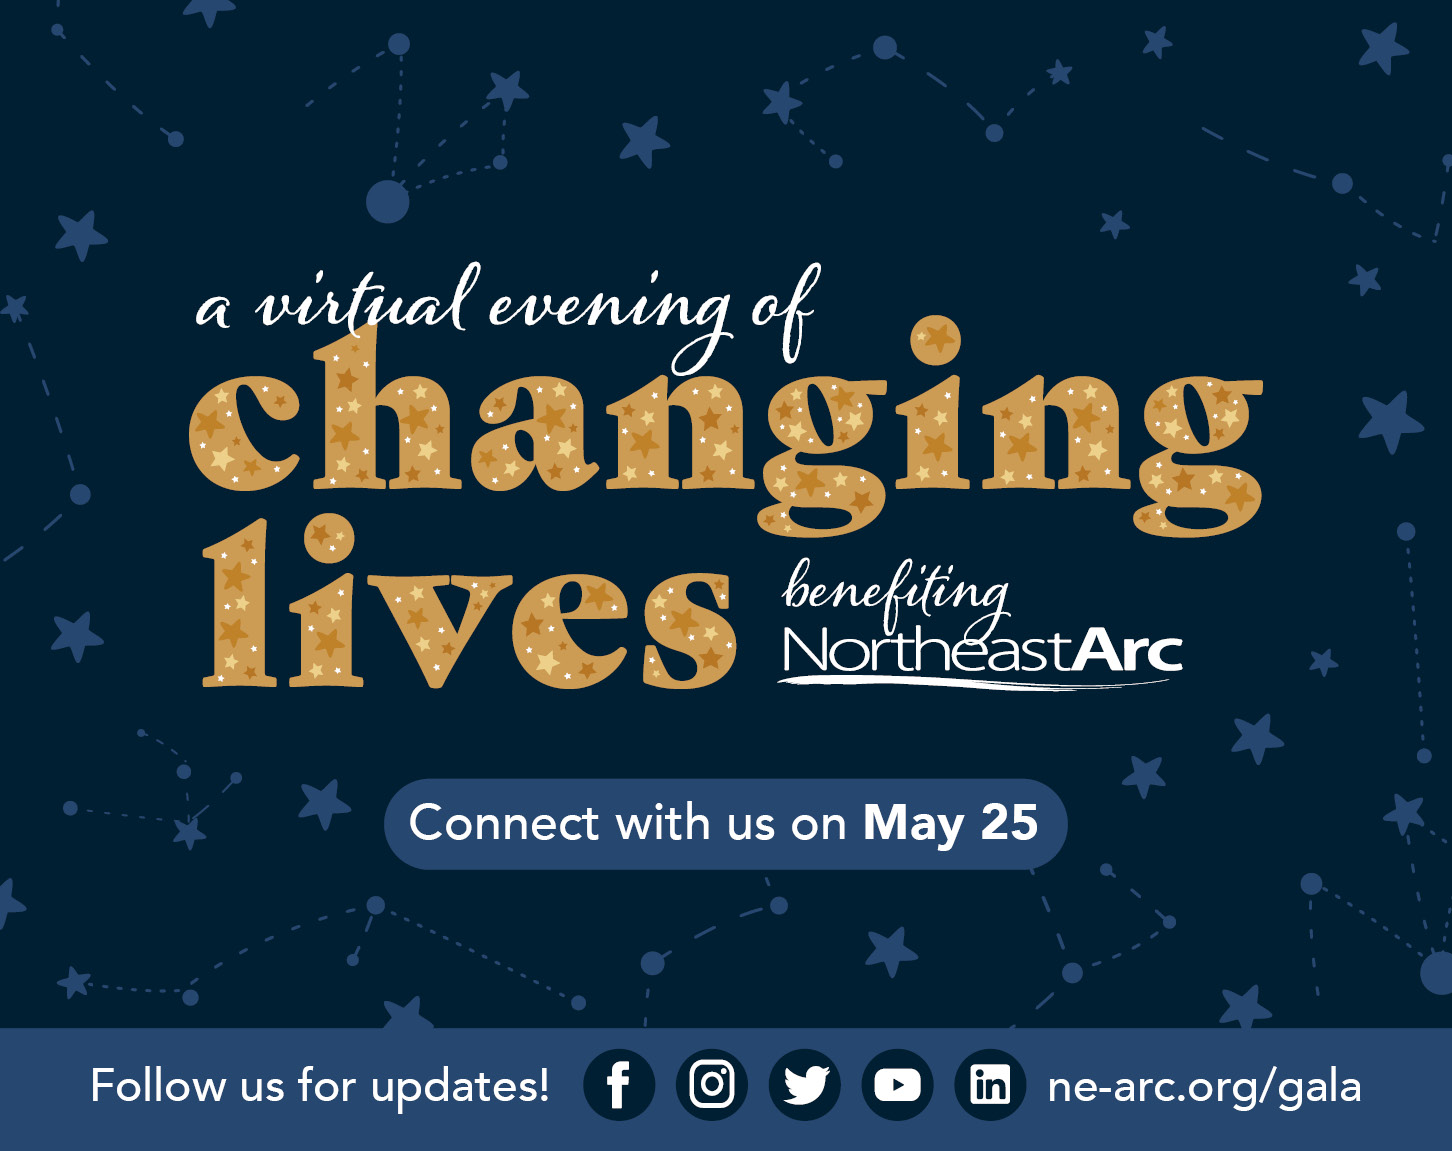 A Virtual Evening of Changing Lives will take place on May 25